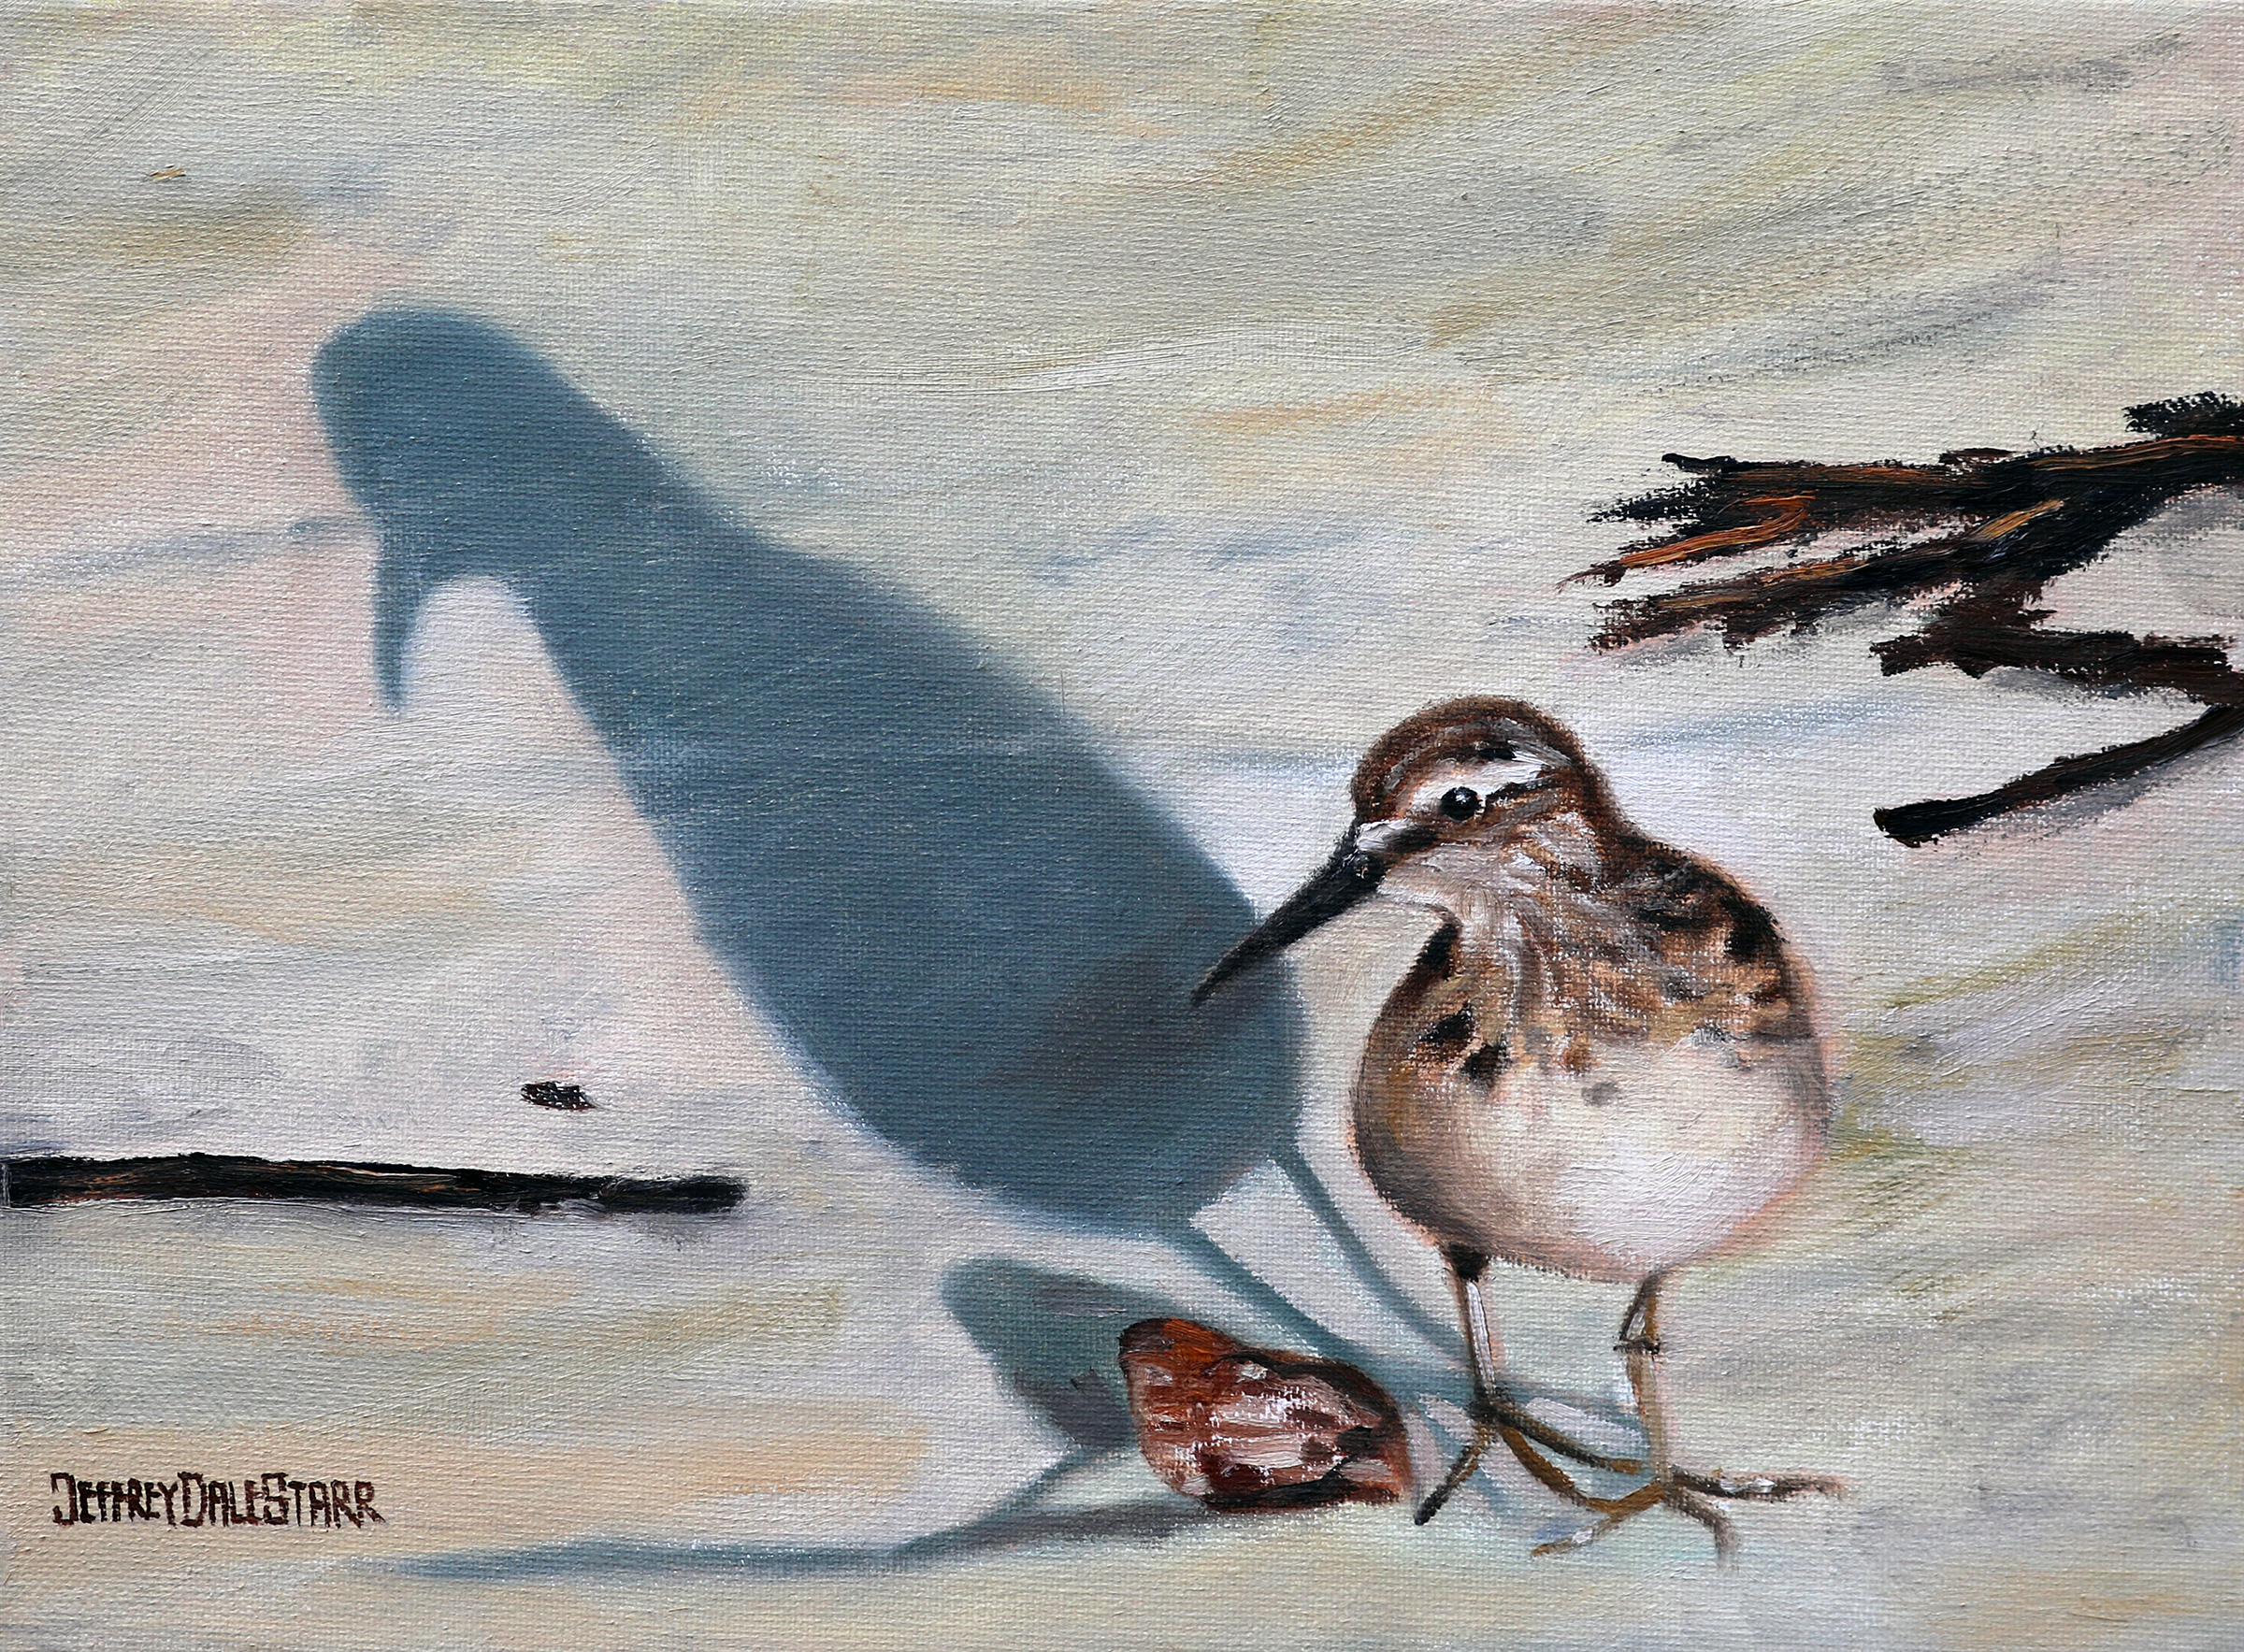 Sandpiper and Shell by Jeffrey Dale Starr